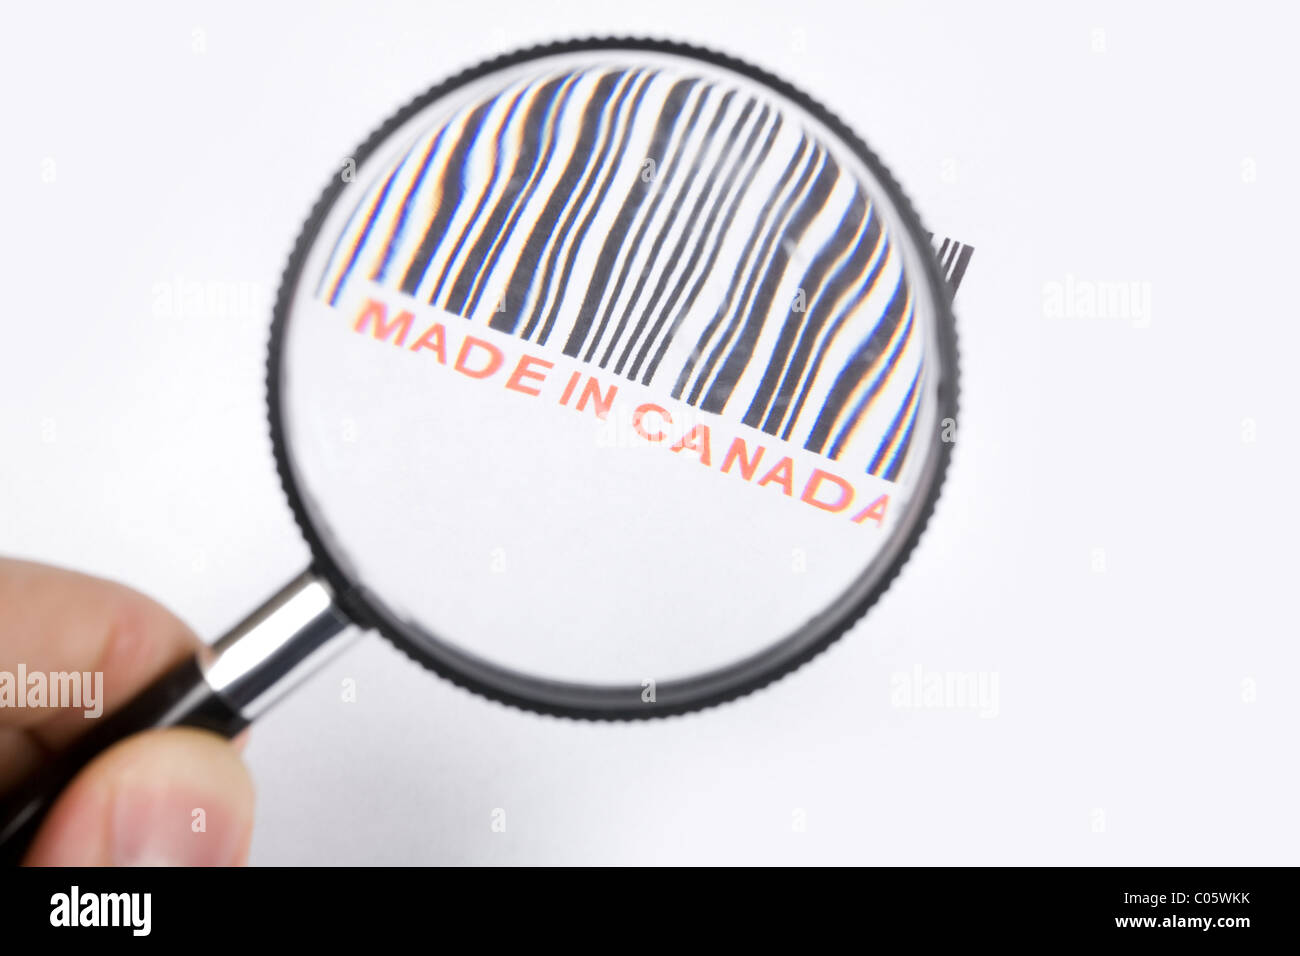 Made in Canada and barcode, business concept Stock Photo